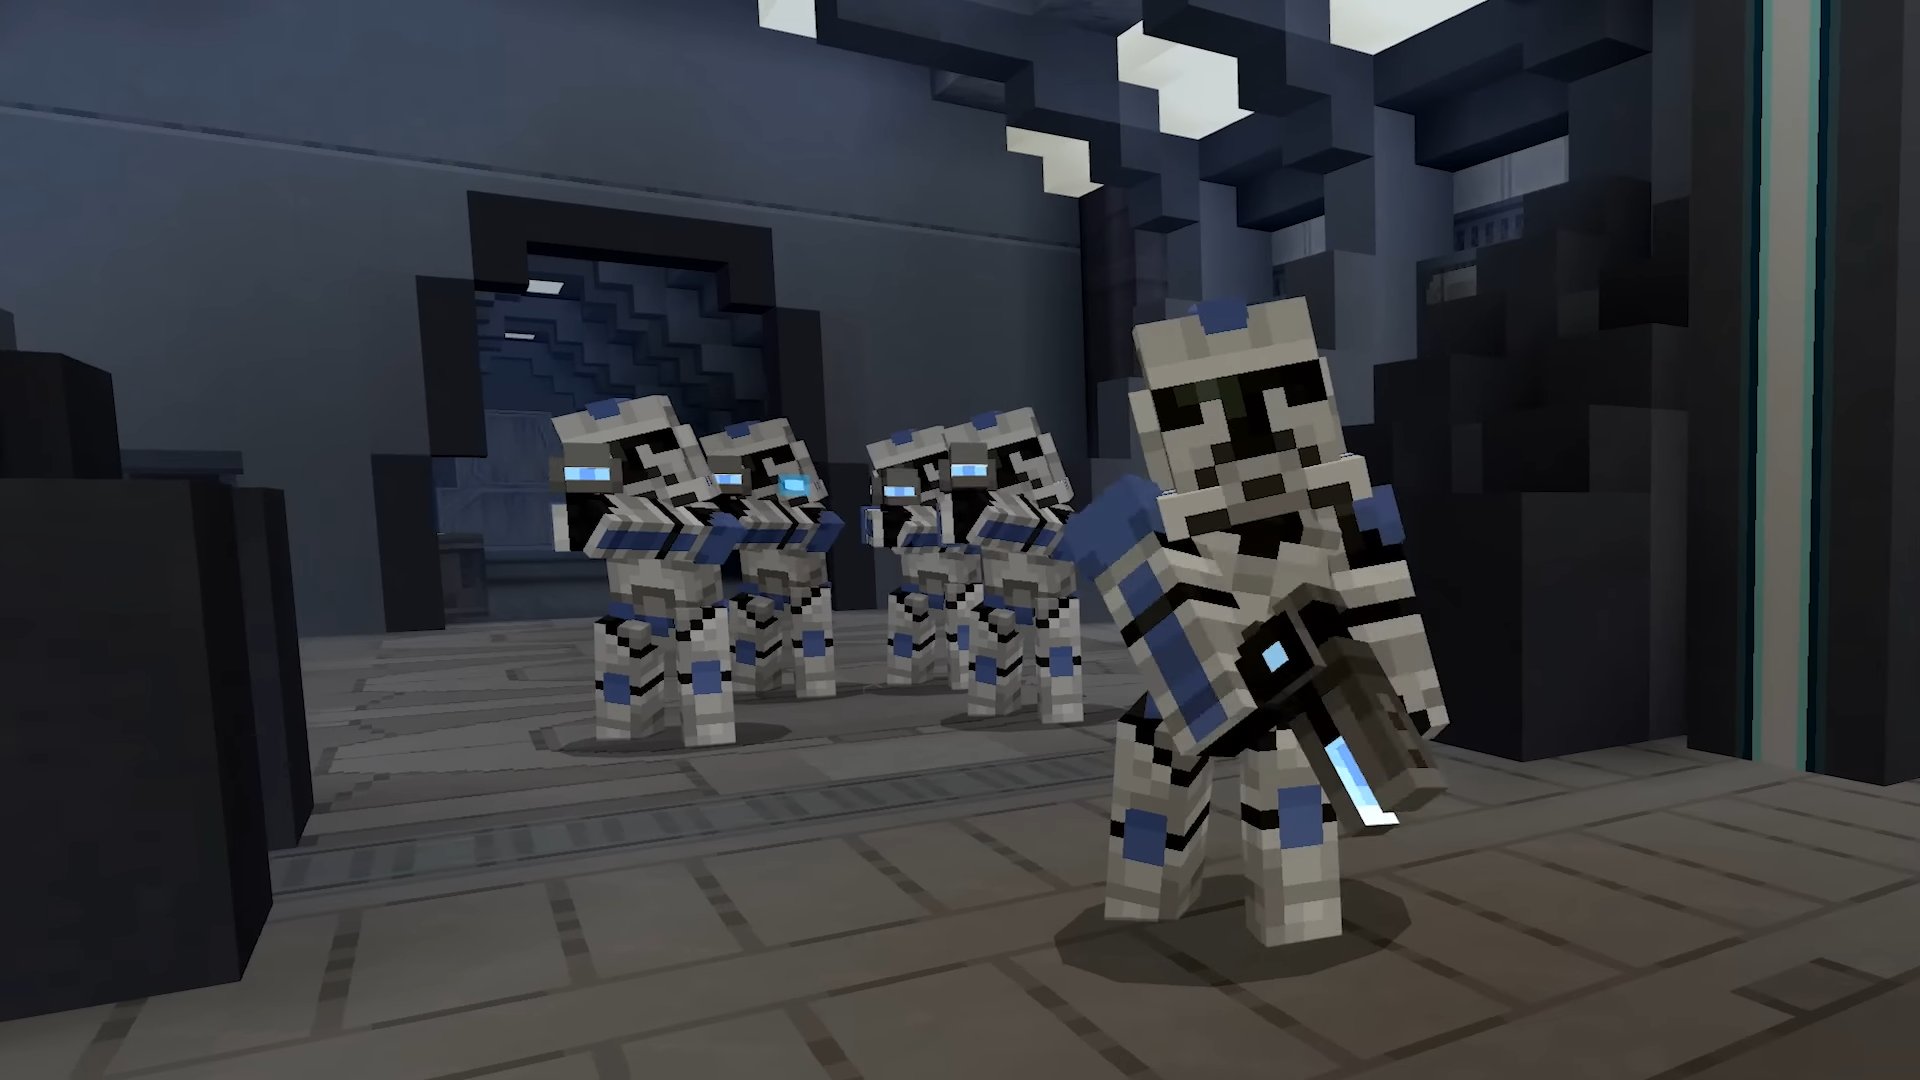 Minecraft Star Wars: Path of the Jedi DLC Now Available